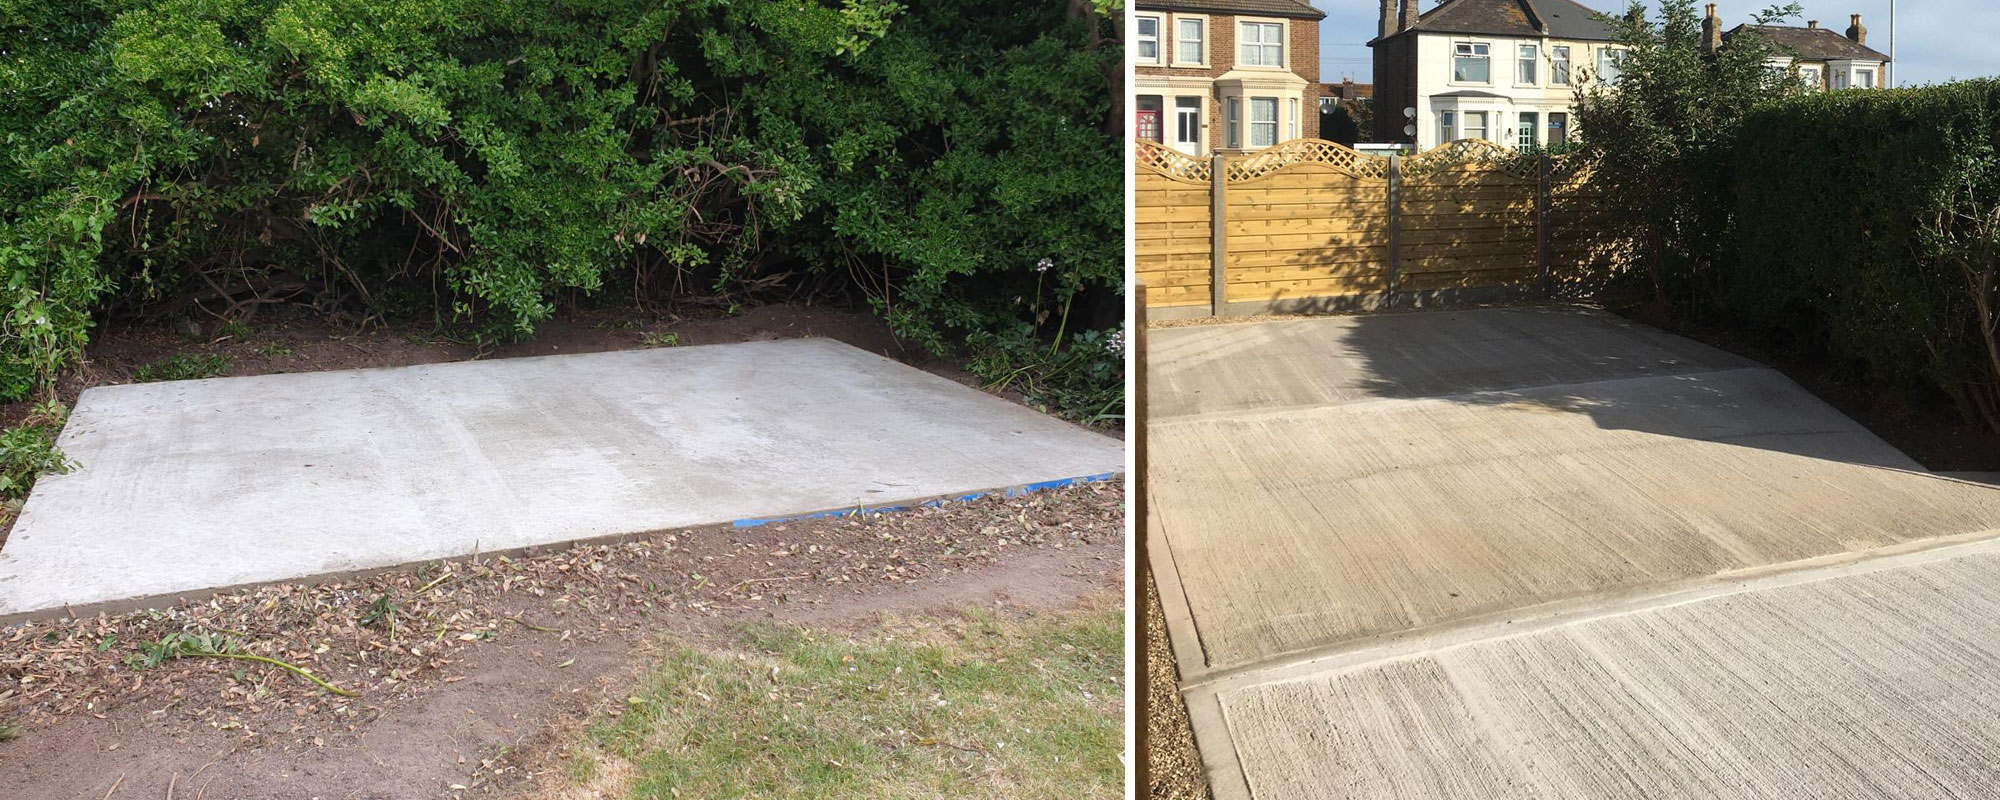 Concrete Base - Quality bases for your shed or extension